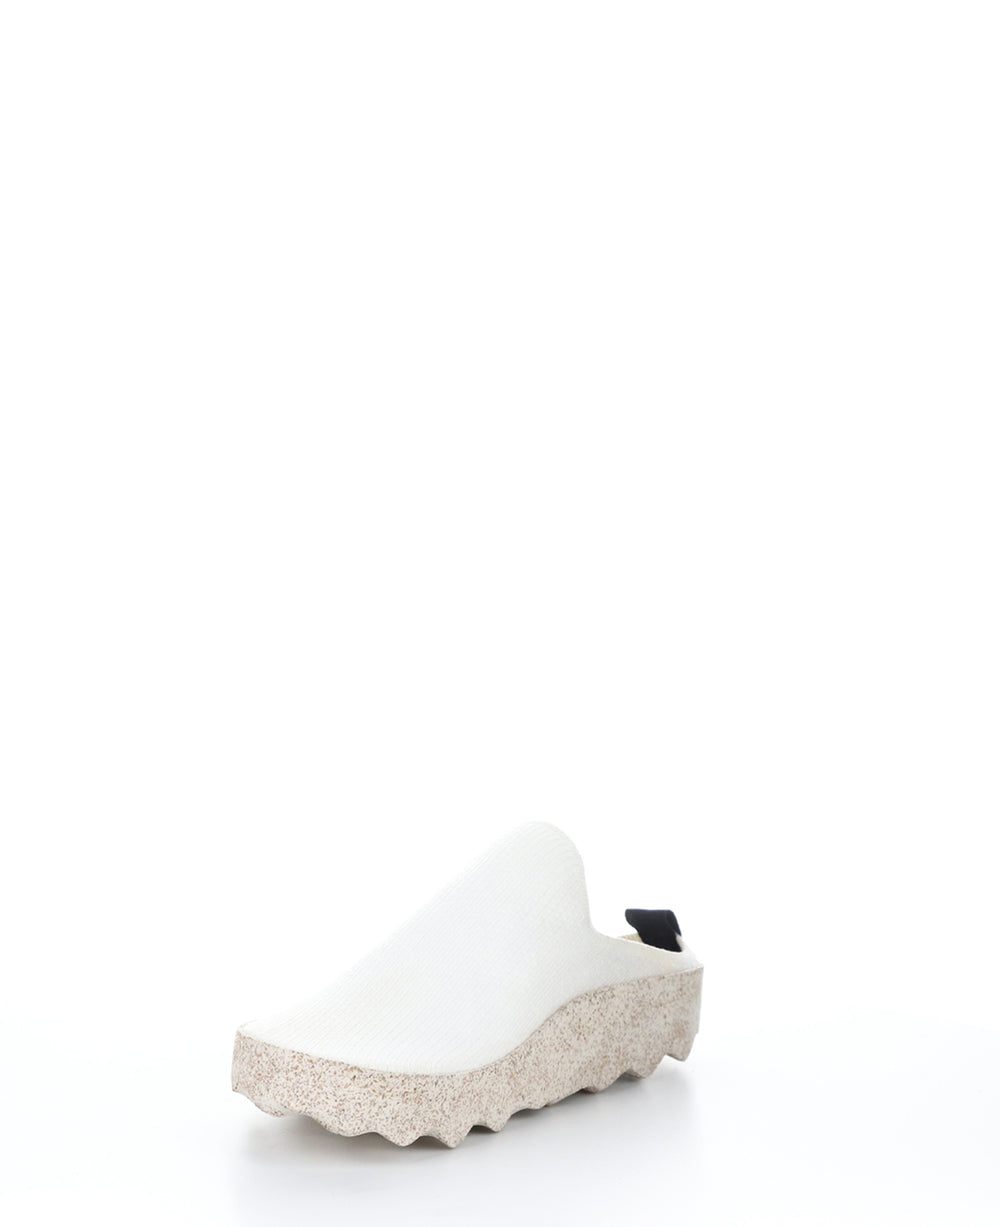 CLOG102ASP WHITE/NATURAL Slip-on Shoes|CLOG102ASP Chaussures à Bout Rond in Blanc